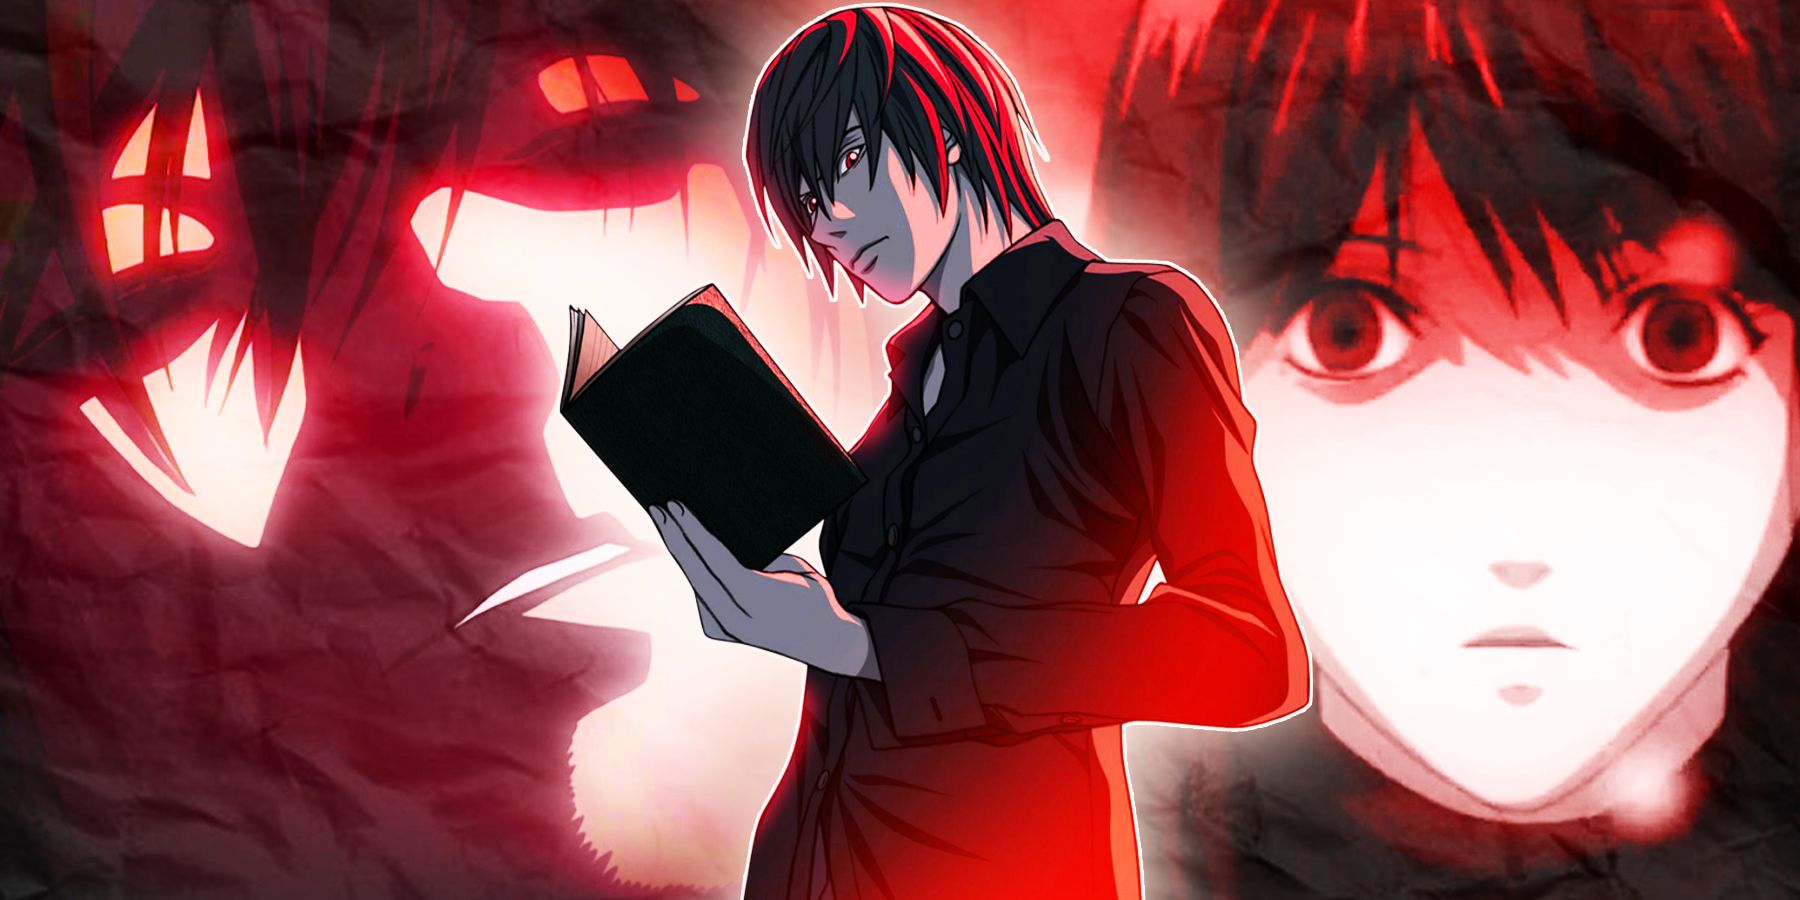 L the detective, Light Yagami/ Kira with the Death Note and Naomi Misora from anime Death Note